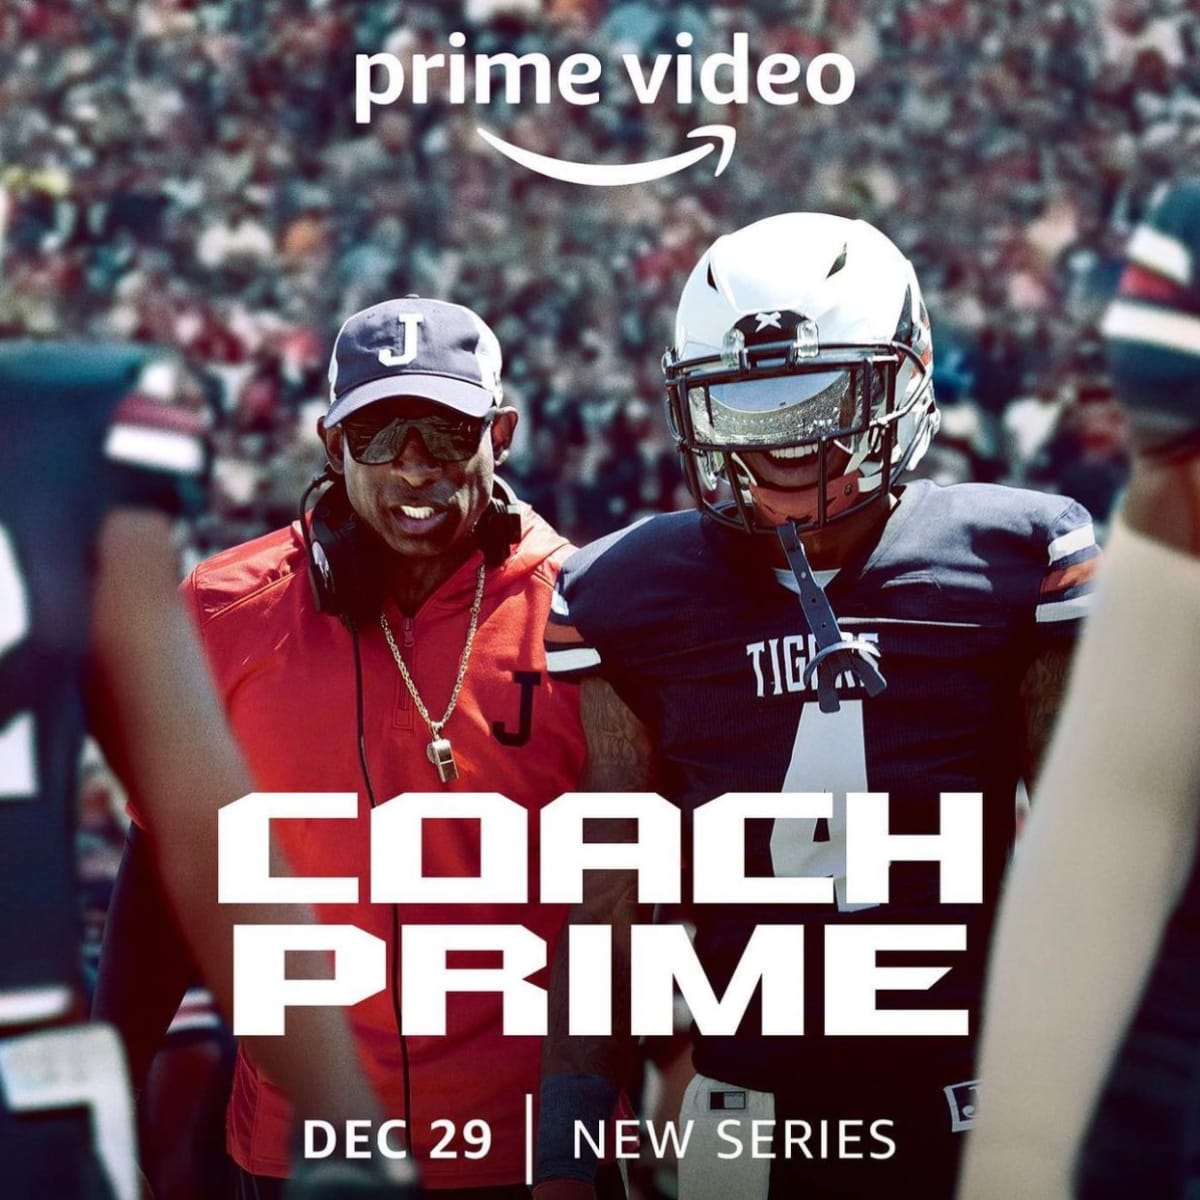 Discussing Before Prime and After Prime, Deion Sanders sheds insight on verbal dust-up with Nick Saban over NIL in new Amazon series